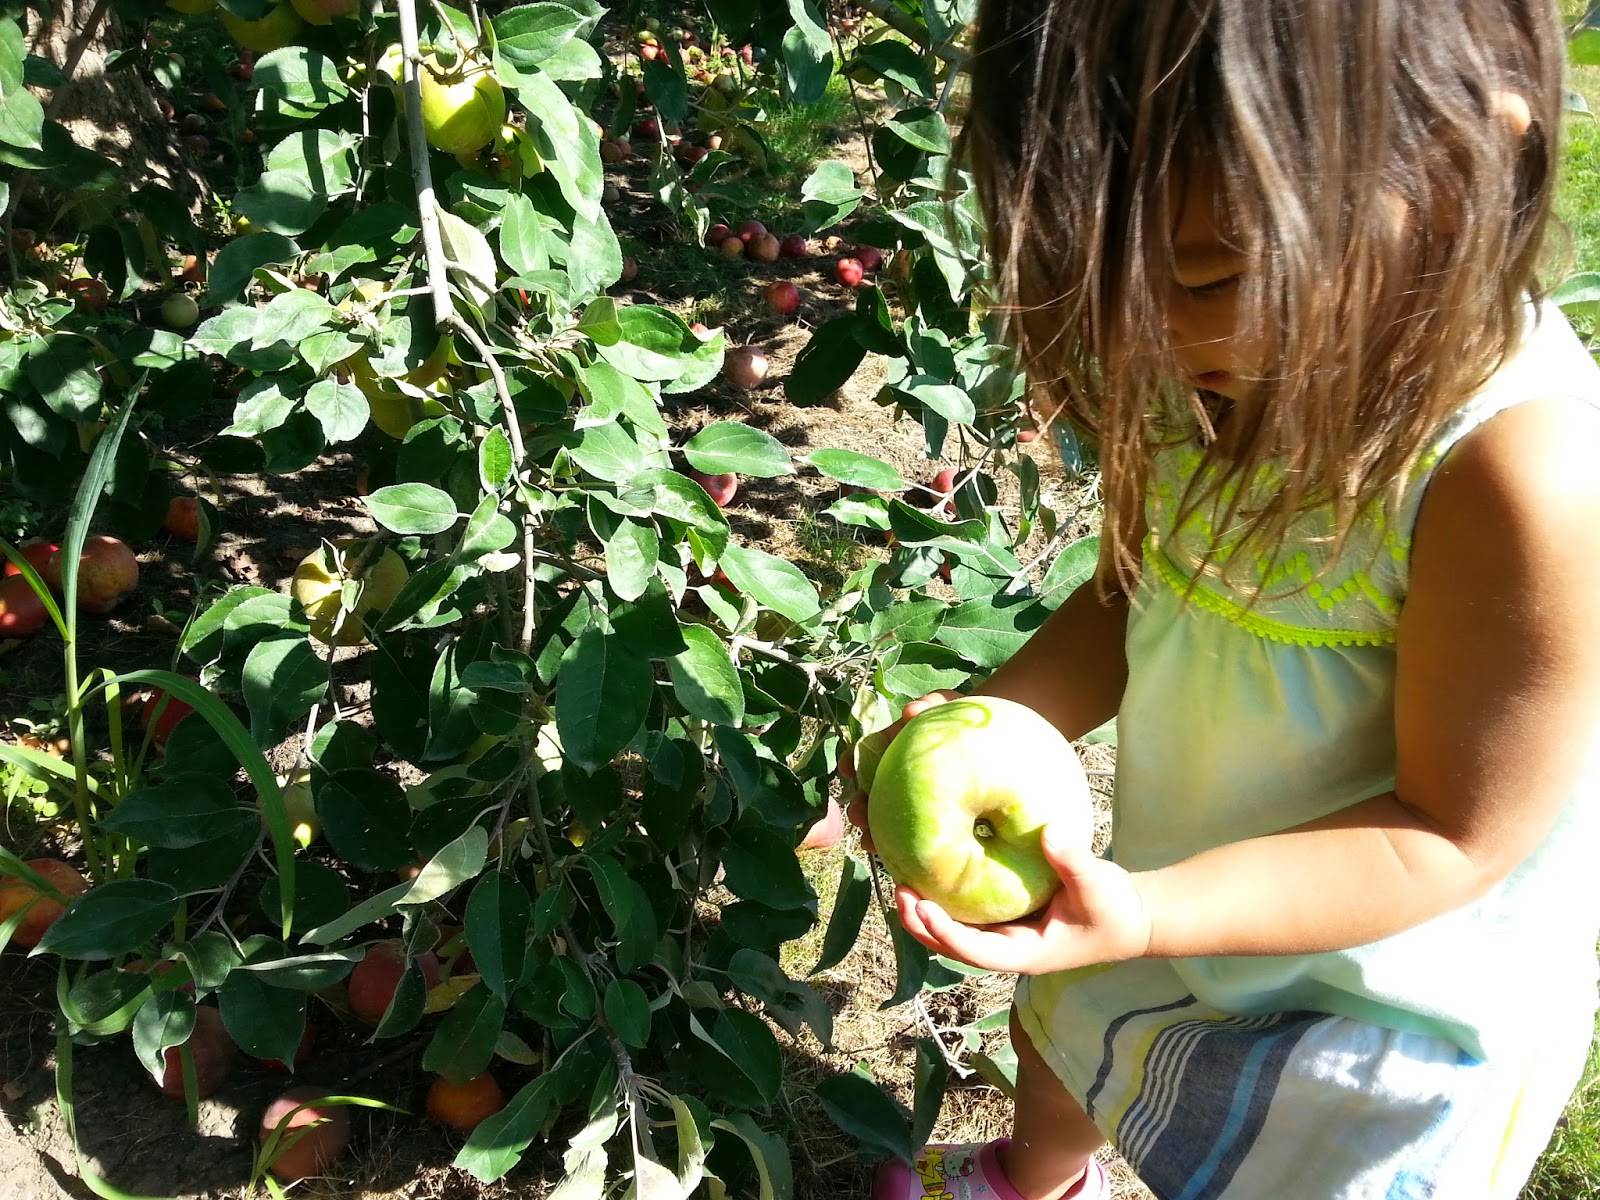 LEONARD ORCHARD APPLE PICKING - What to do in Southern Oregon - Medford - Kids